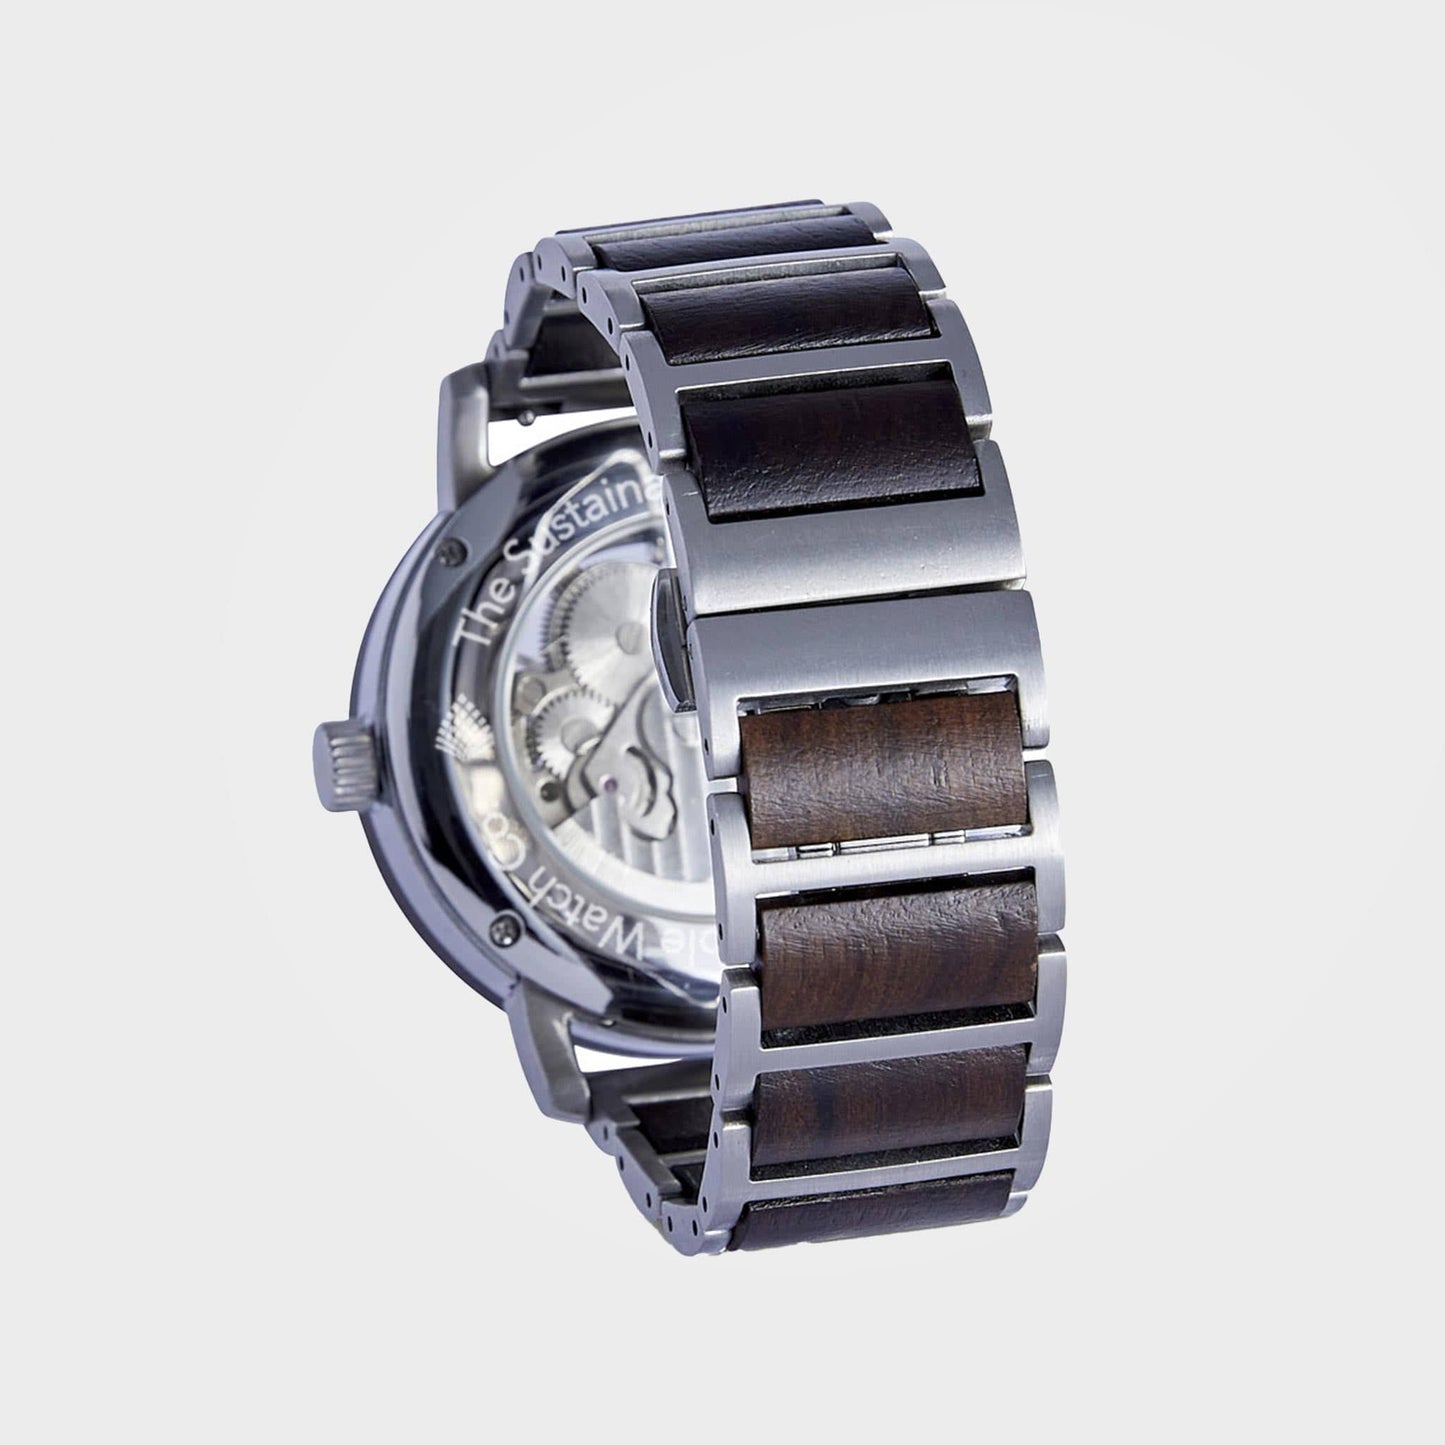 Luxury Wooden Watch For Men: The Banyan